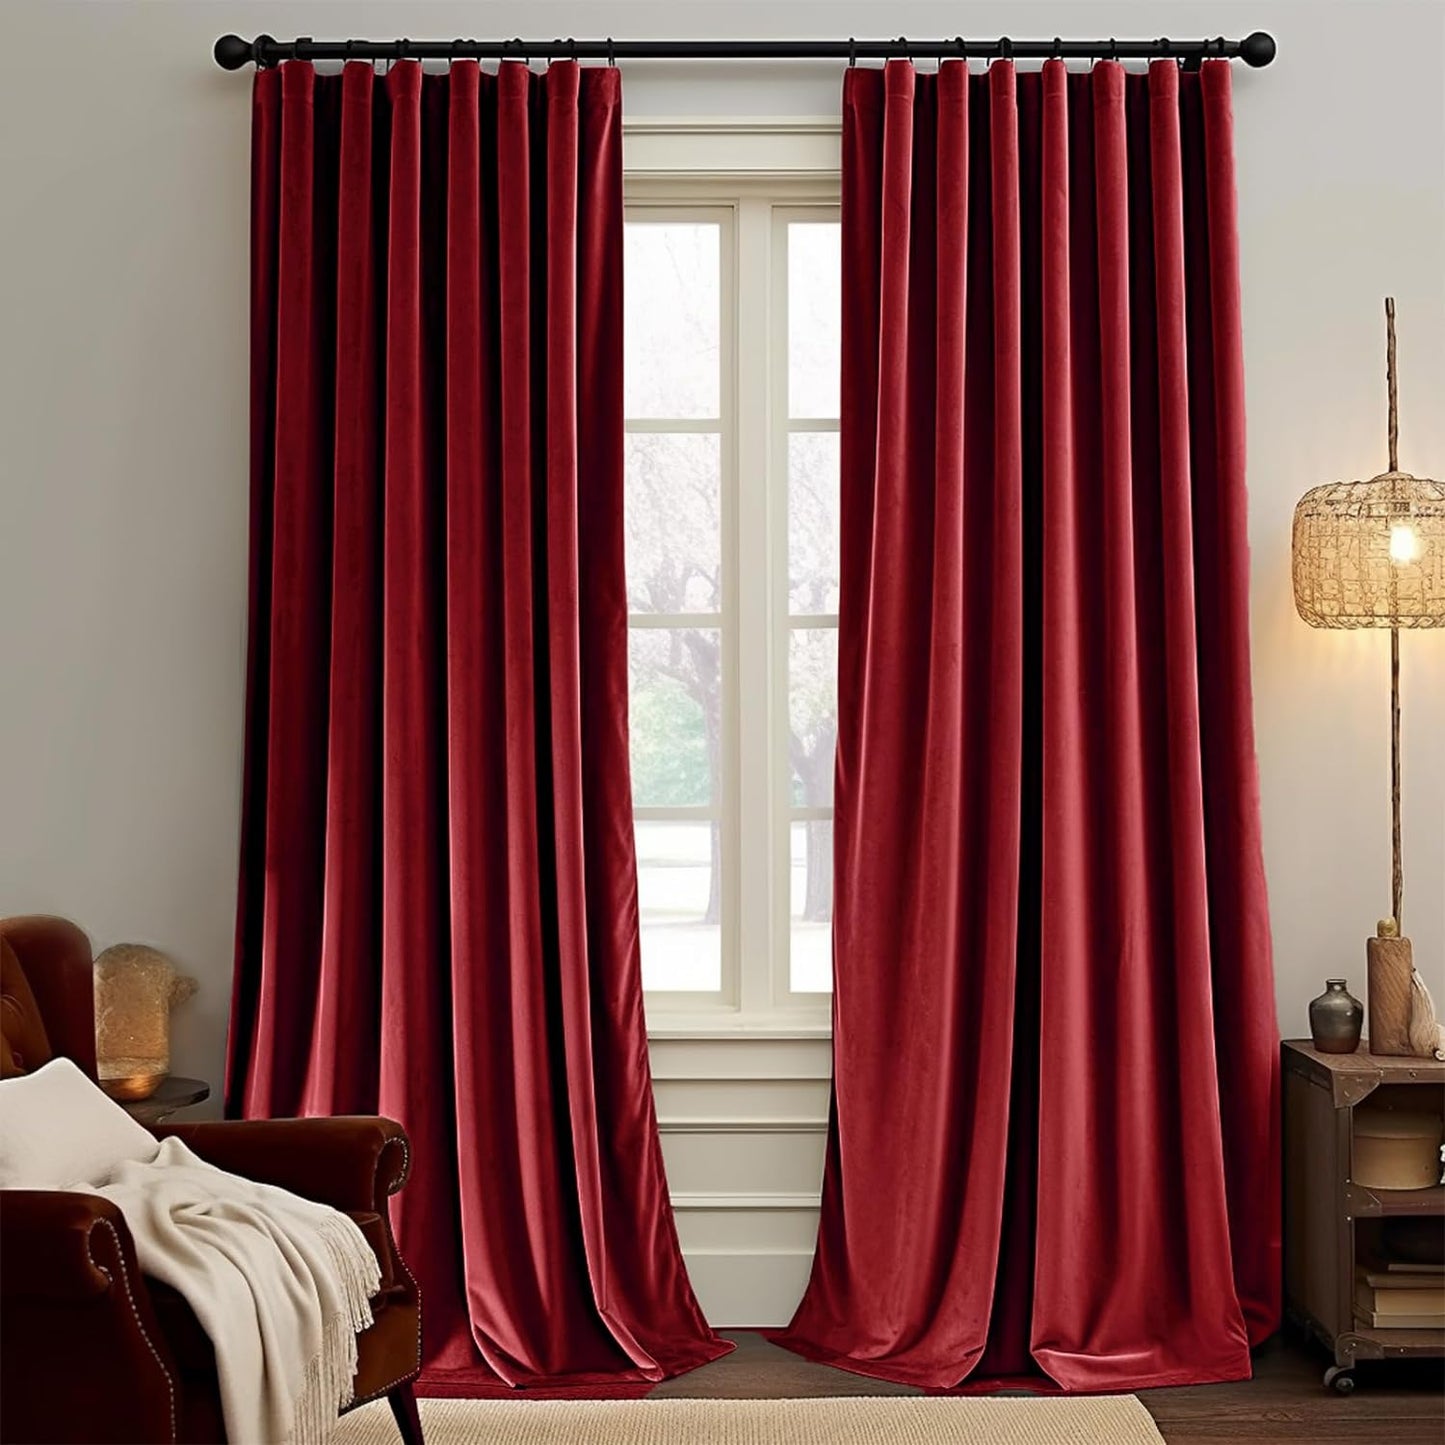 Jinchan Velvet Blackout Curtain for Living Room, Thermal Insulated Luxury Drape for Bedroom 96 Inch Long, Stylish Soft Privacy Room Darkening Window Treatment Rod Pocket 1 Panel, Emerald Green  CKNY HOME FASHION Rod Pocket | Burgundy W52 X L84 